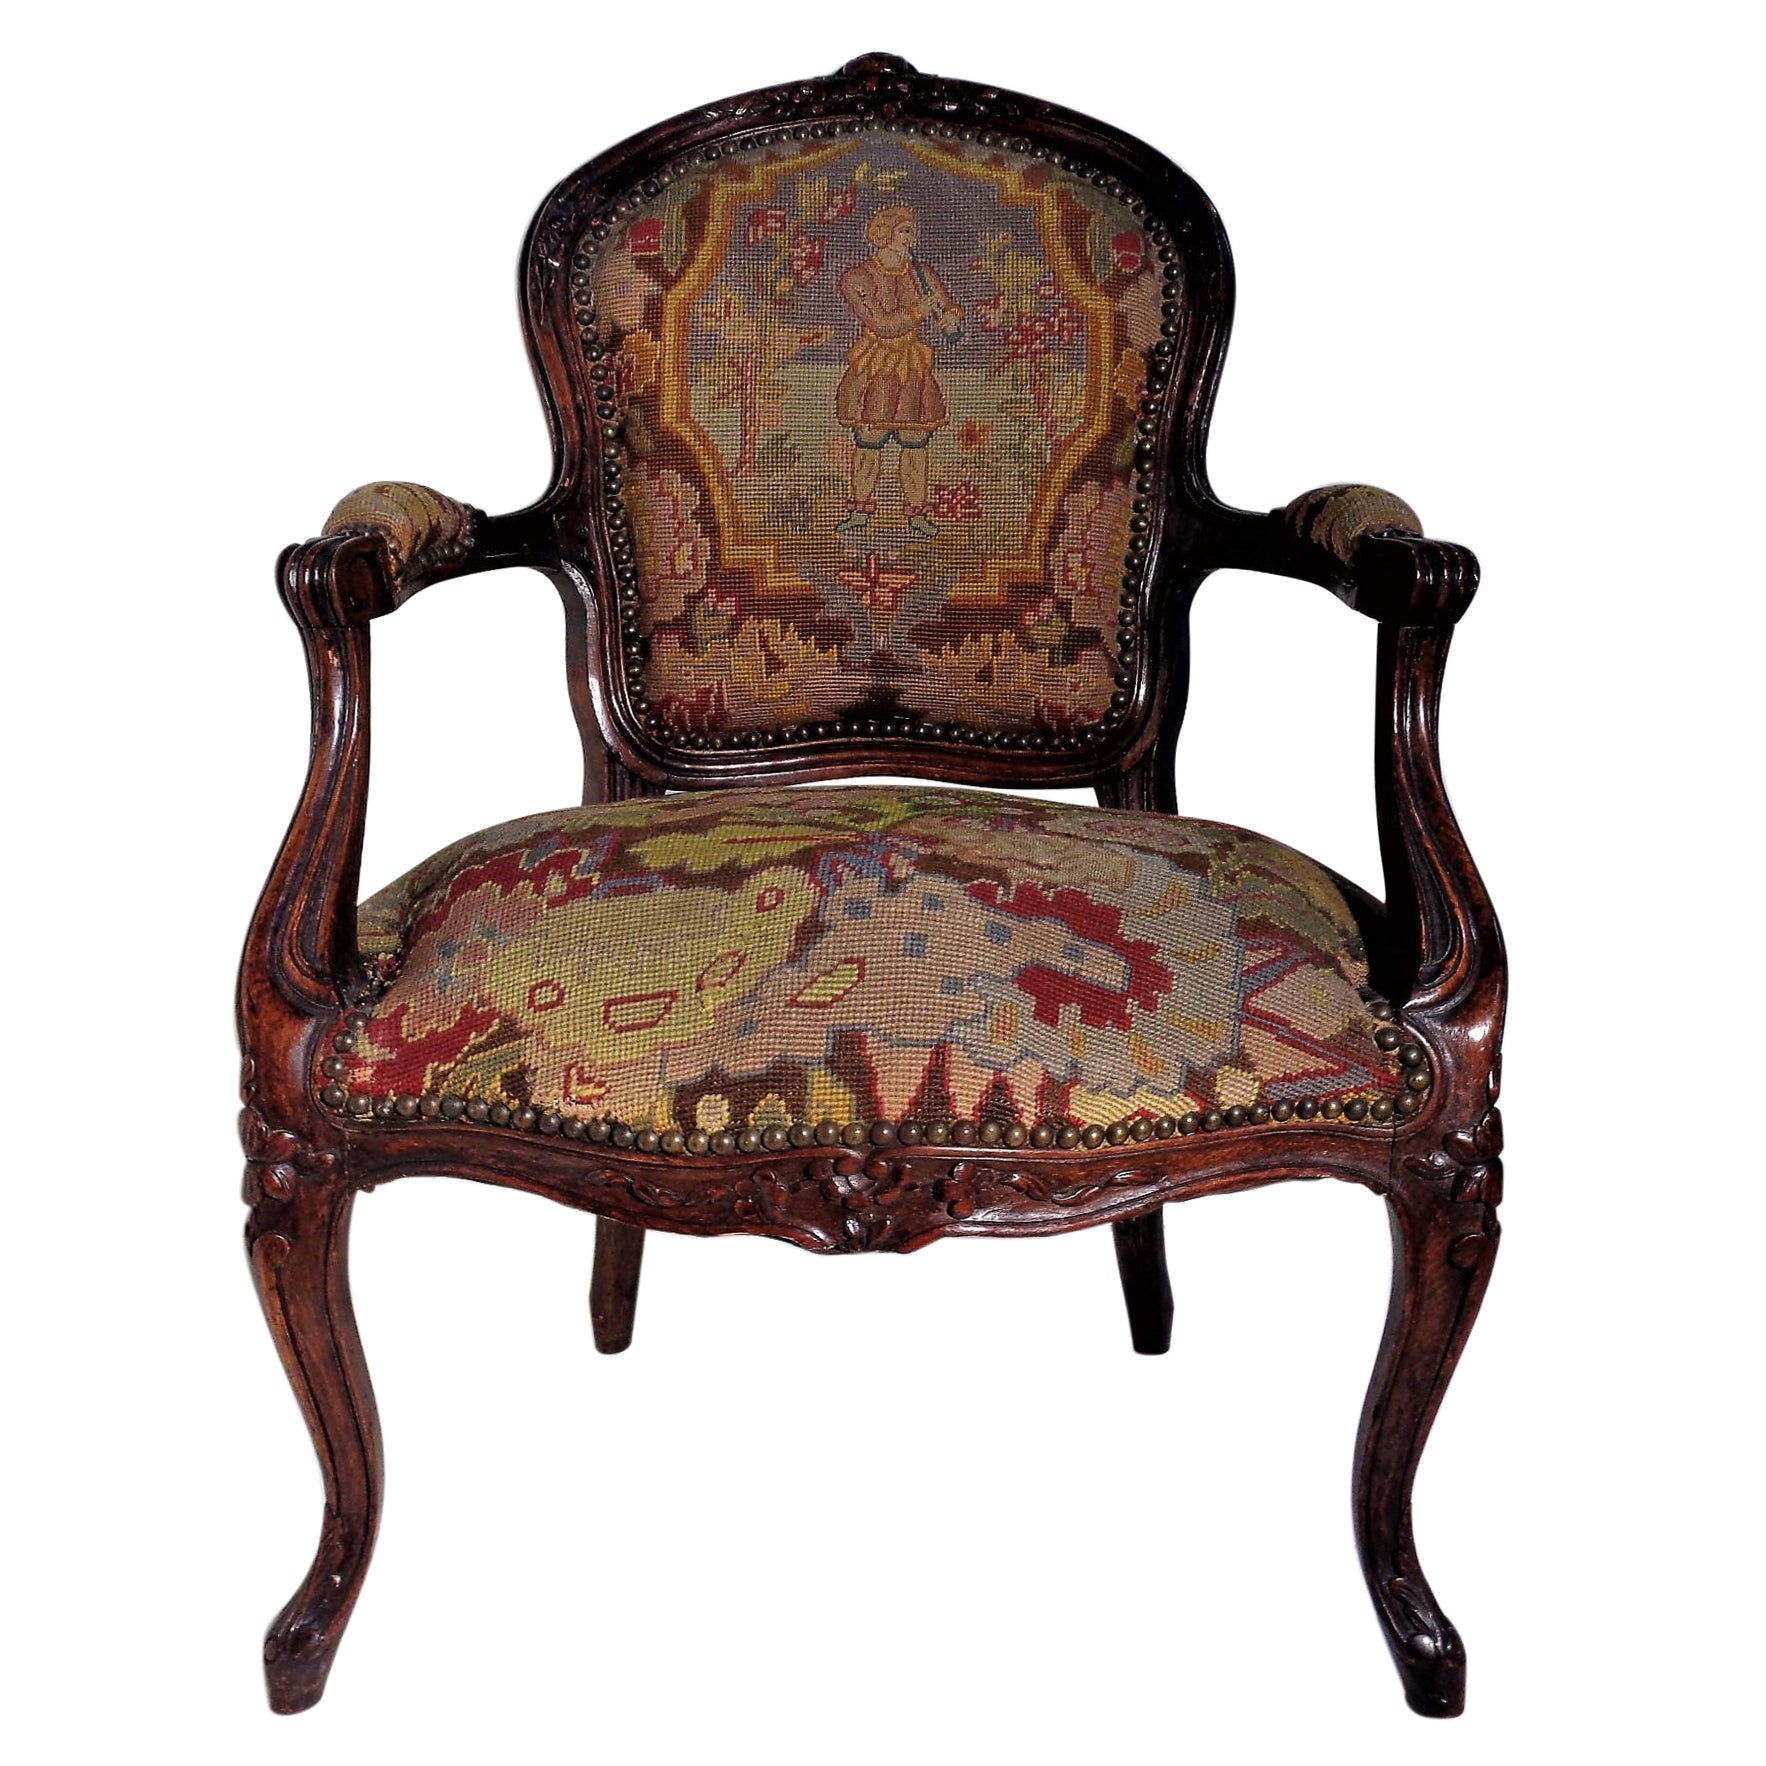 688-116 Original 1925 Advert HARRODS Reproduction 17th Century Tapestry Chair 